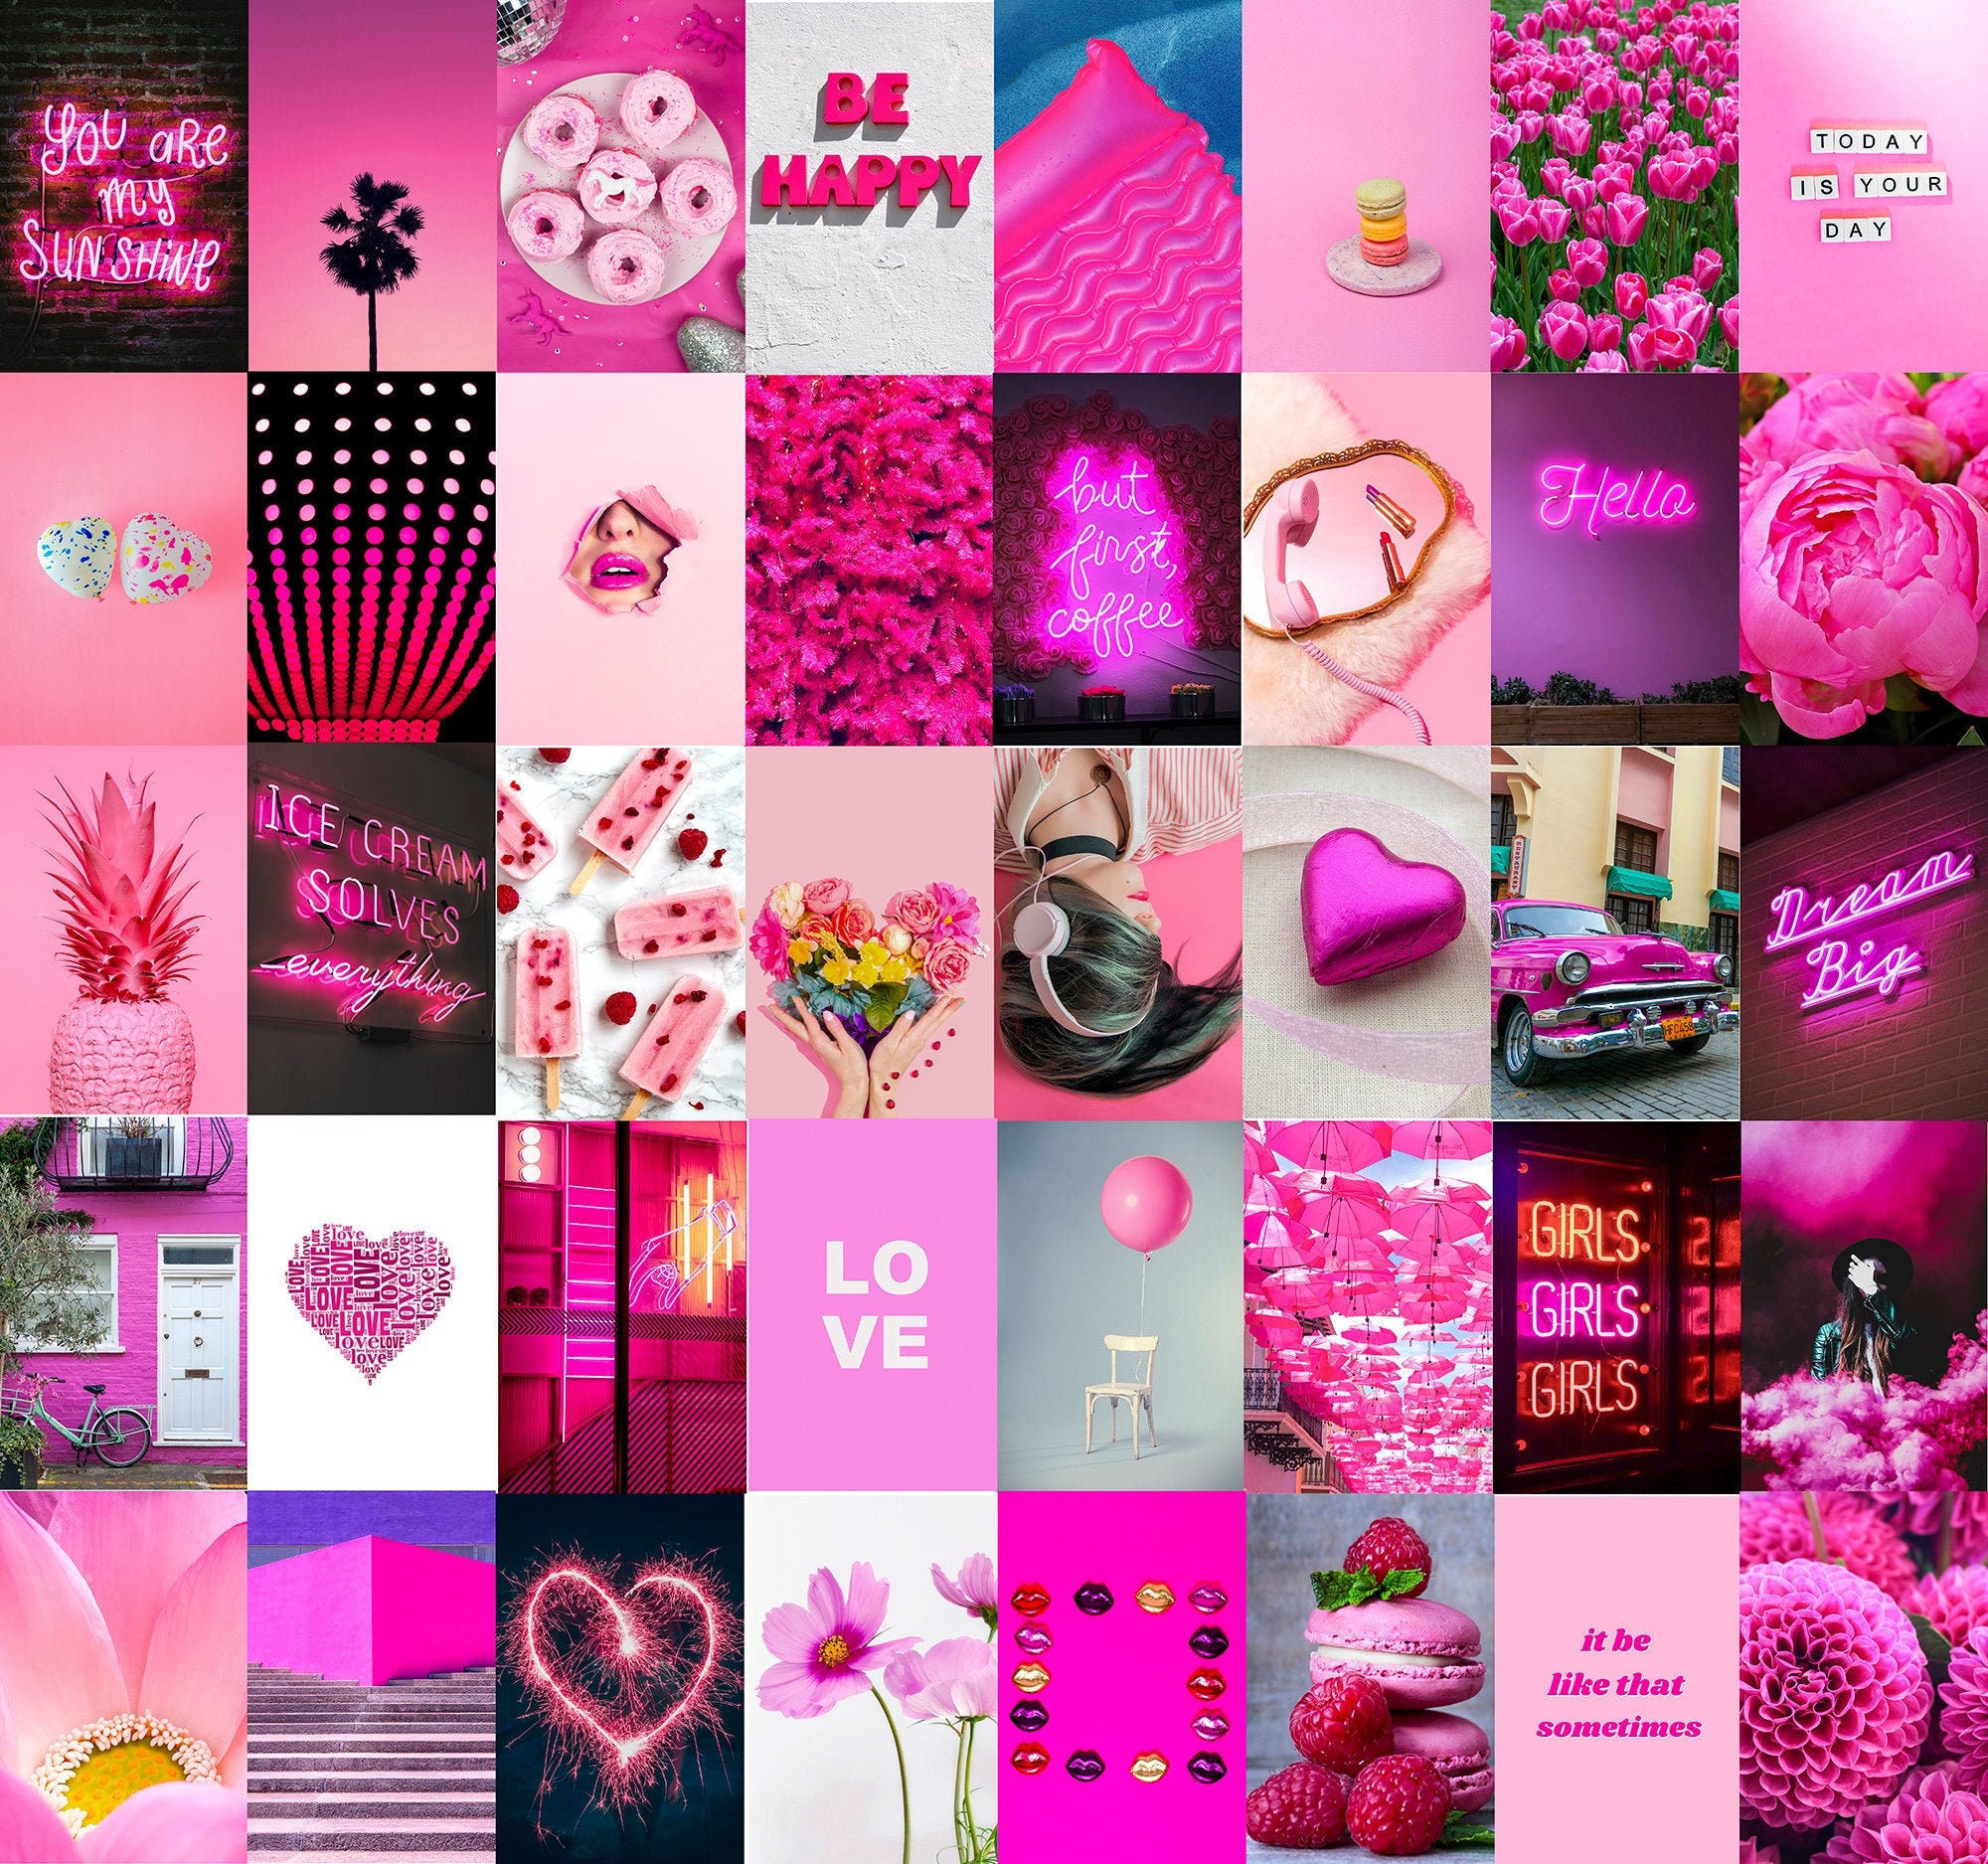  LCLAIDYDY 50 PCS Wall Collage Kit Aesthetic Pictures, Pink Neon  Room Decor Posters for Room Aesthetic, Dorm Photo Wall Decor for Teen  Girls, VSCO Girl Bedroom Decor (4x6 Inch): Posters 